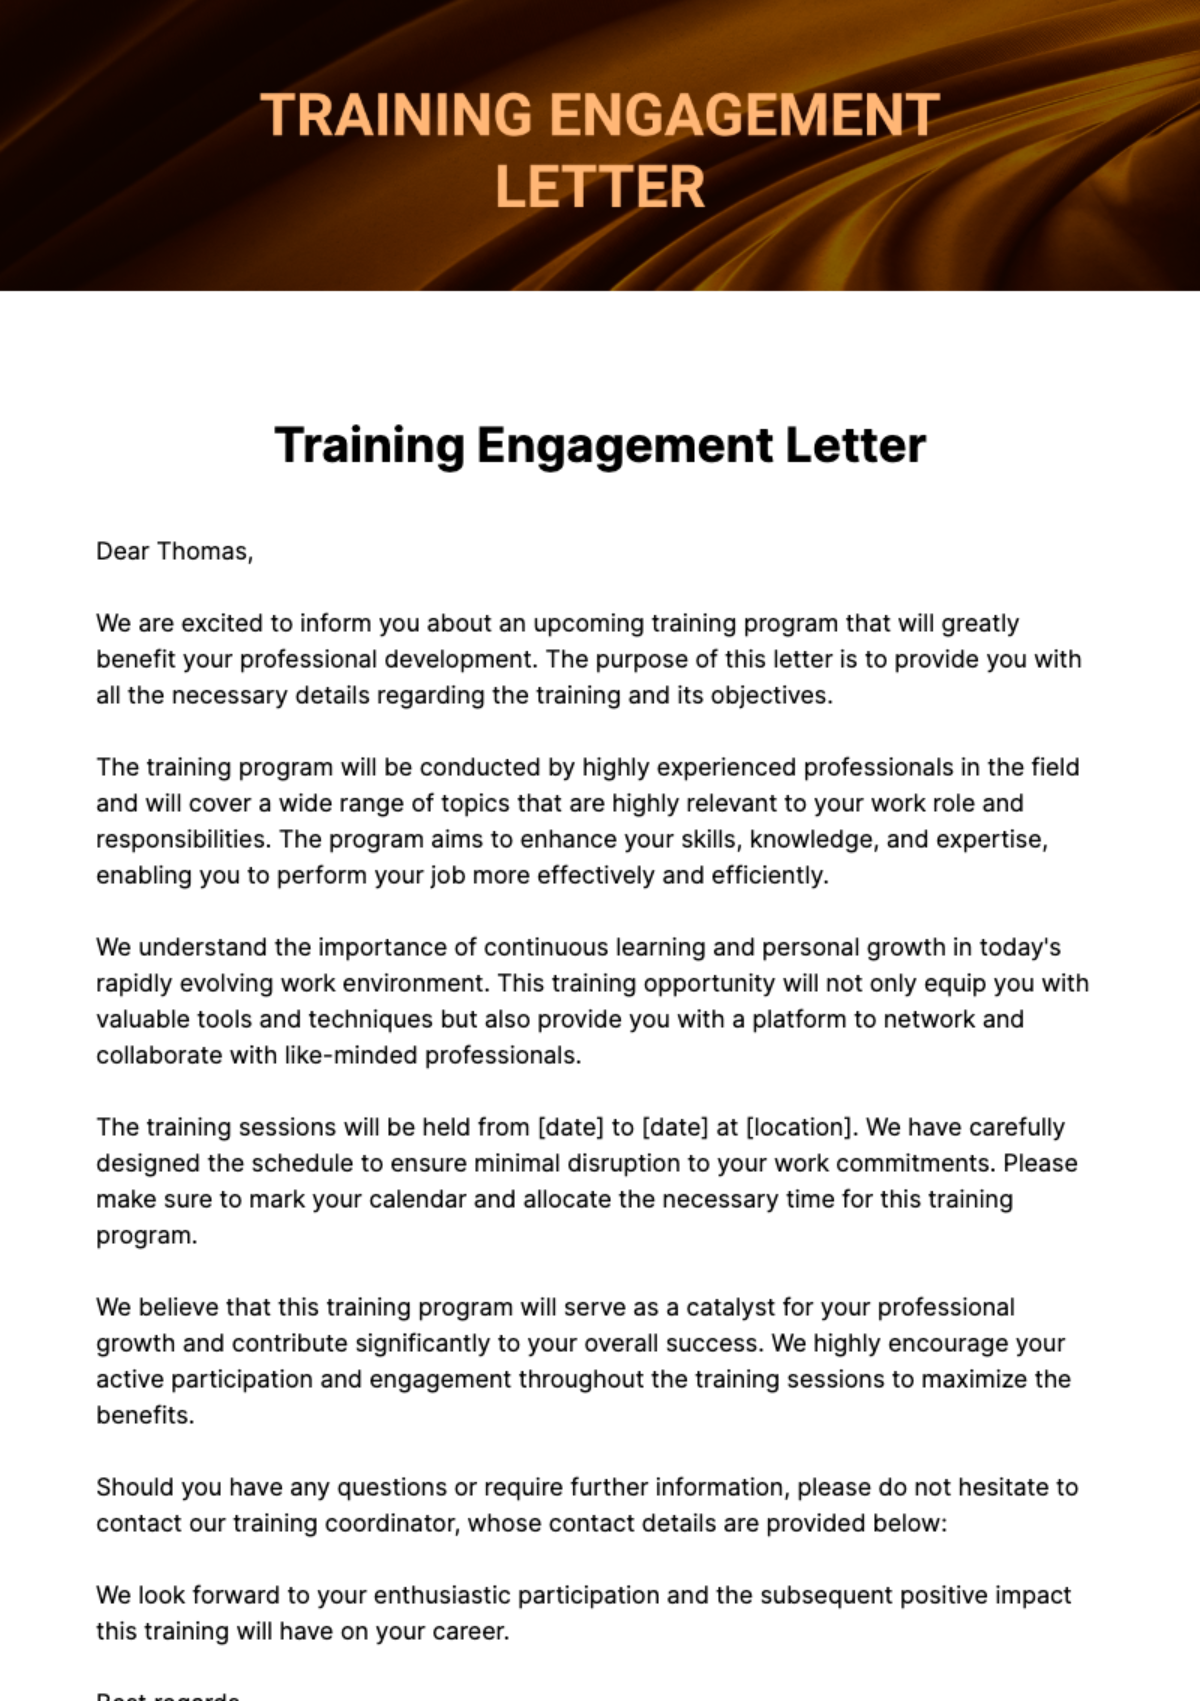 Free Training Engagement Letter Template